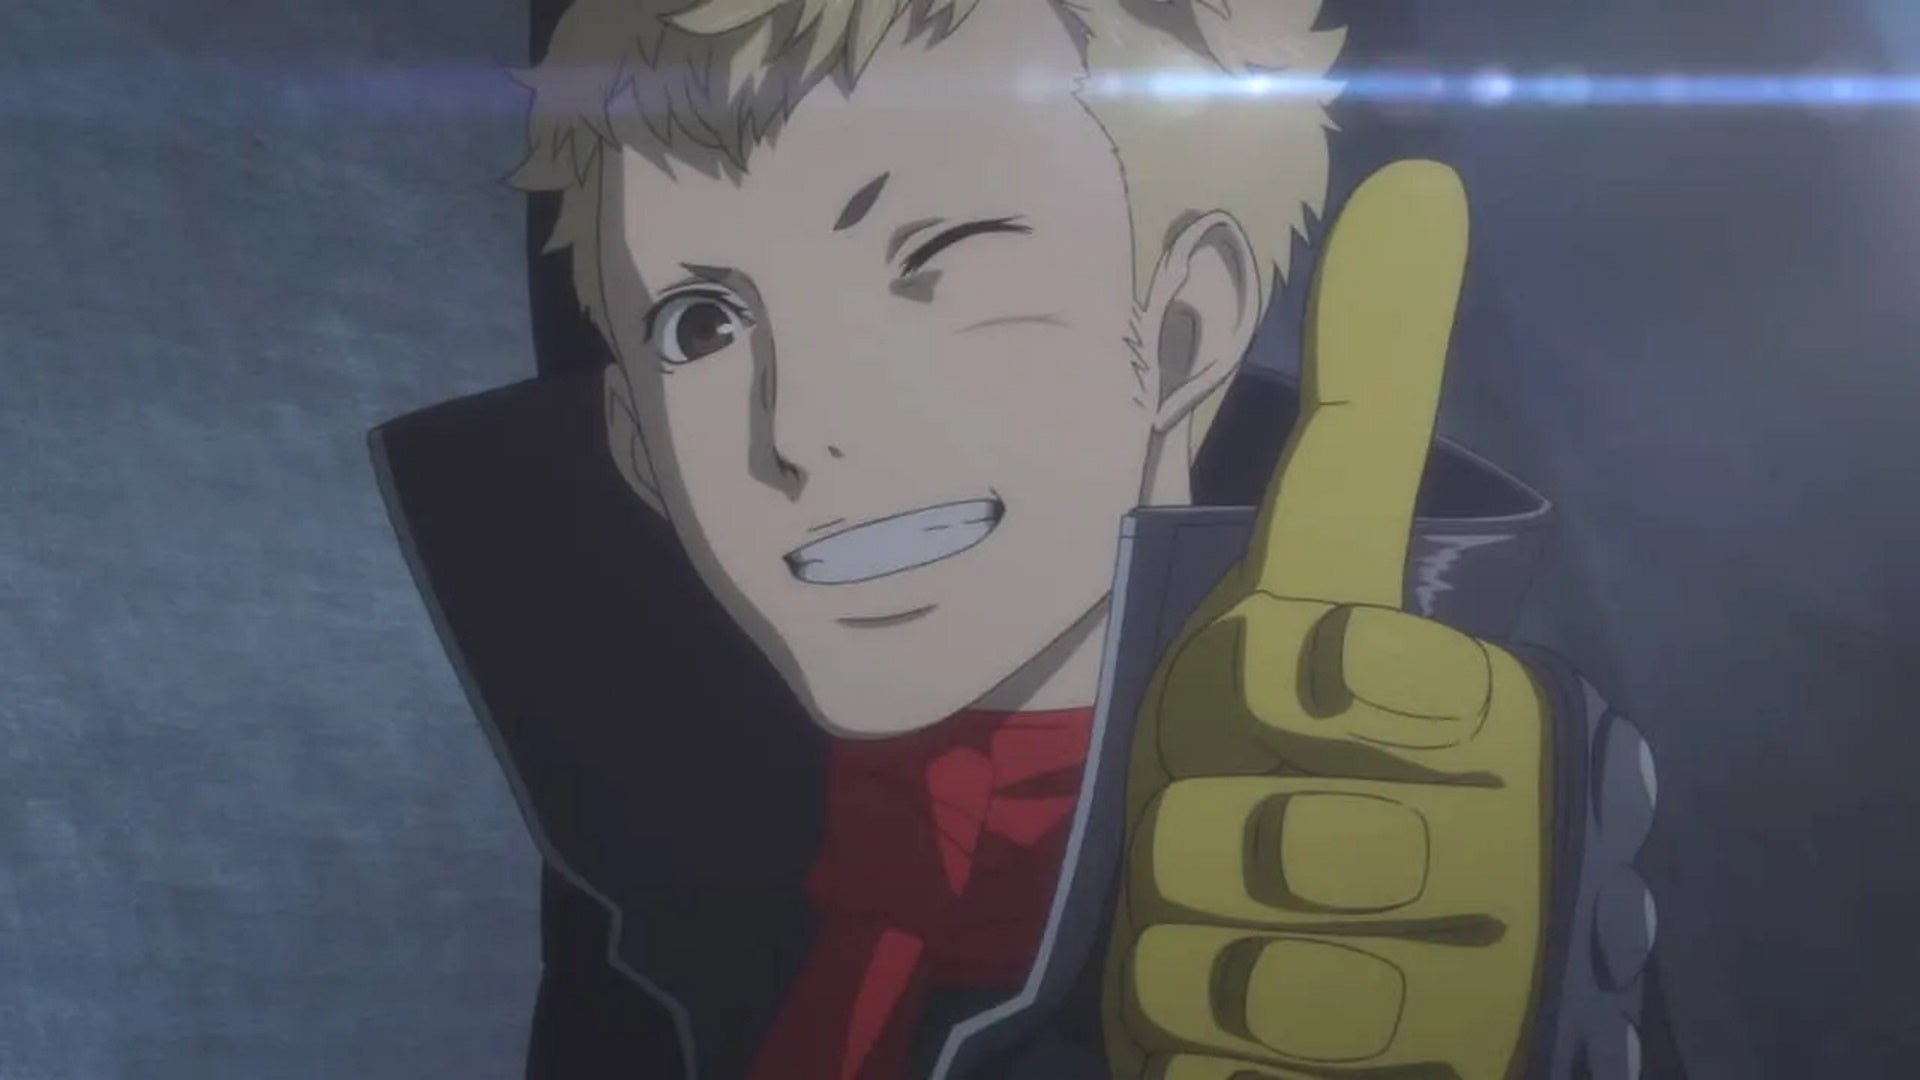 Persona 5 Royal Ryuji Confidant: An anime young man with blonde hair and yellow gloves gives the camera a thumbs up